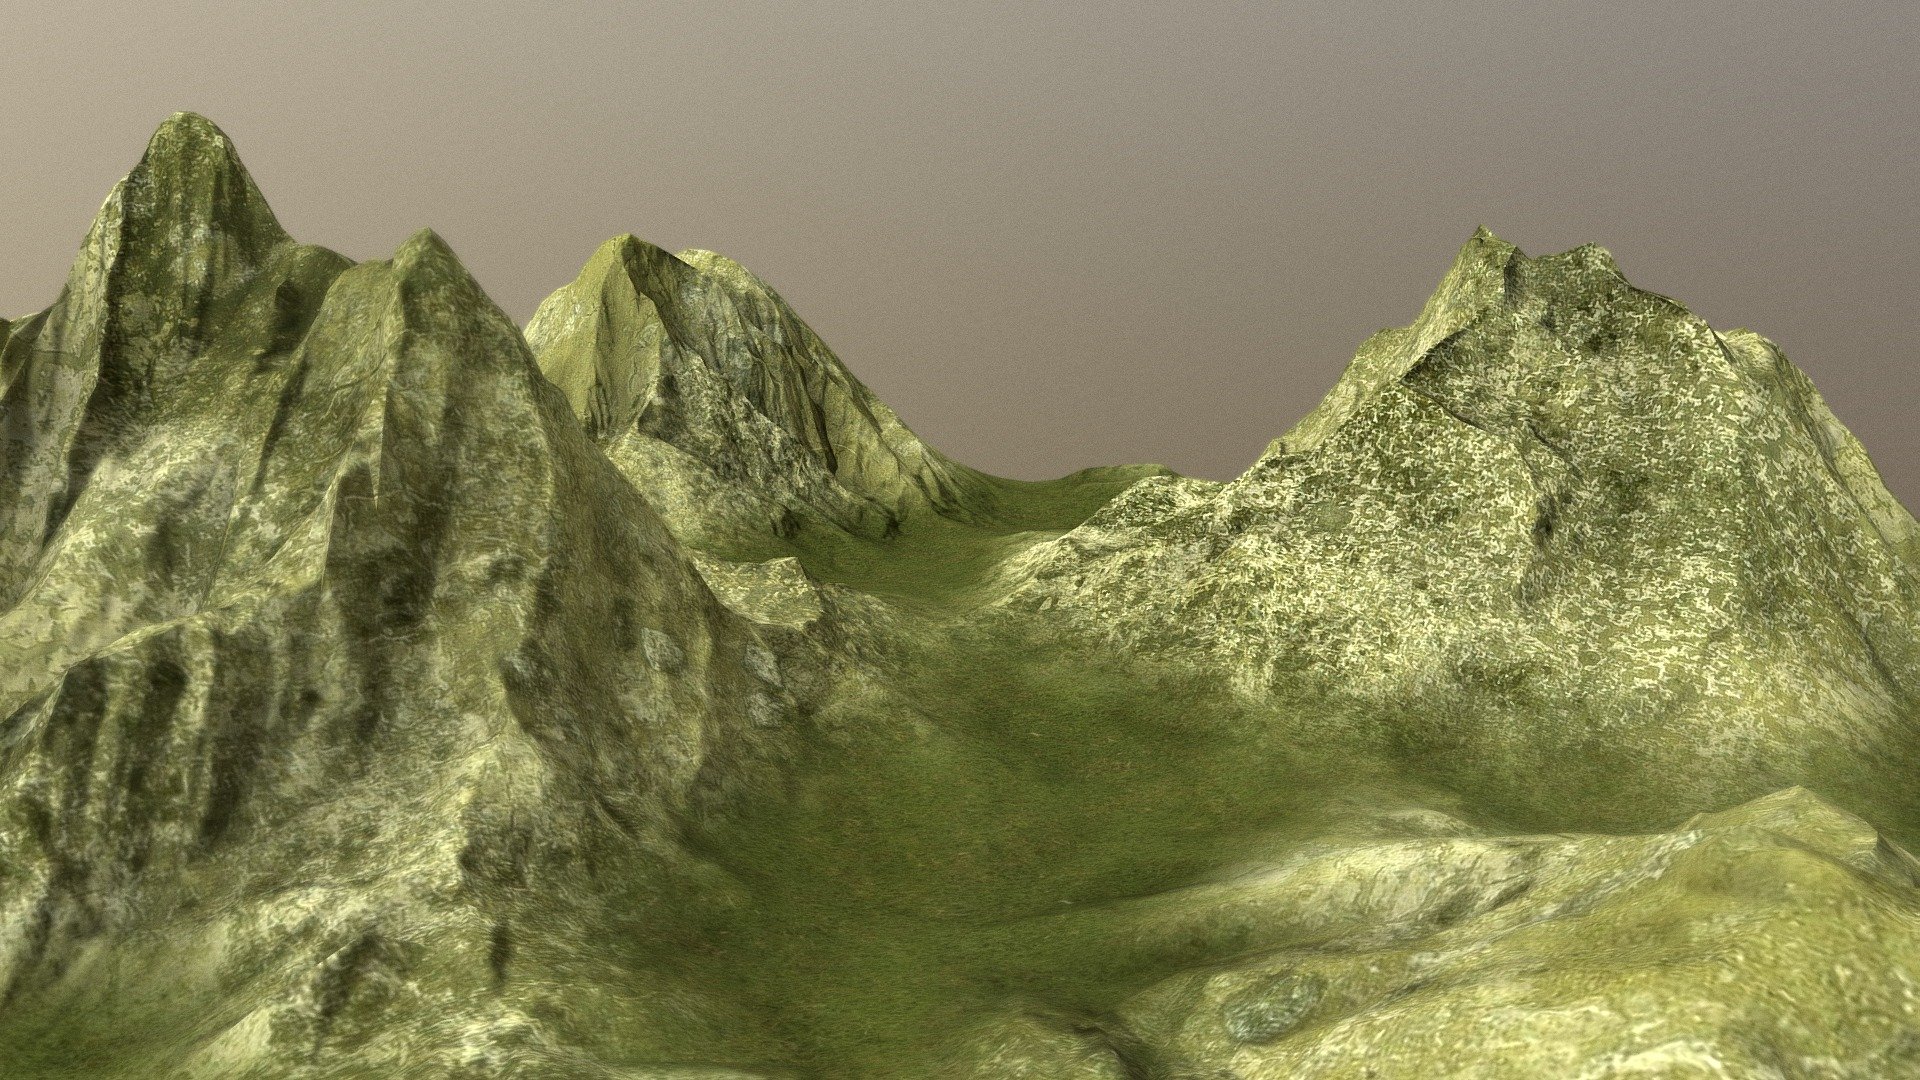 Valley under the Mountains -low poly-

Quad topology - 9.5k polygons

UV mapped with non-overlapping

All files are zipped in one folder. Contains 2 file formats obj &amp; fbx, and 4k pbr textures (Albedo, Normal, AO, Gloss &amp; Spec)

Useful for games, high resolution renders and other graphical projects 3d model